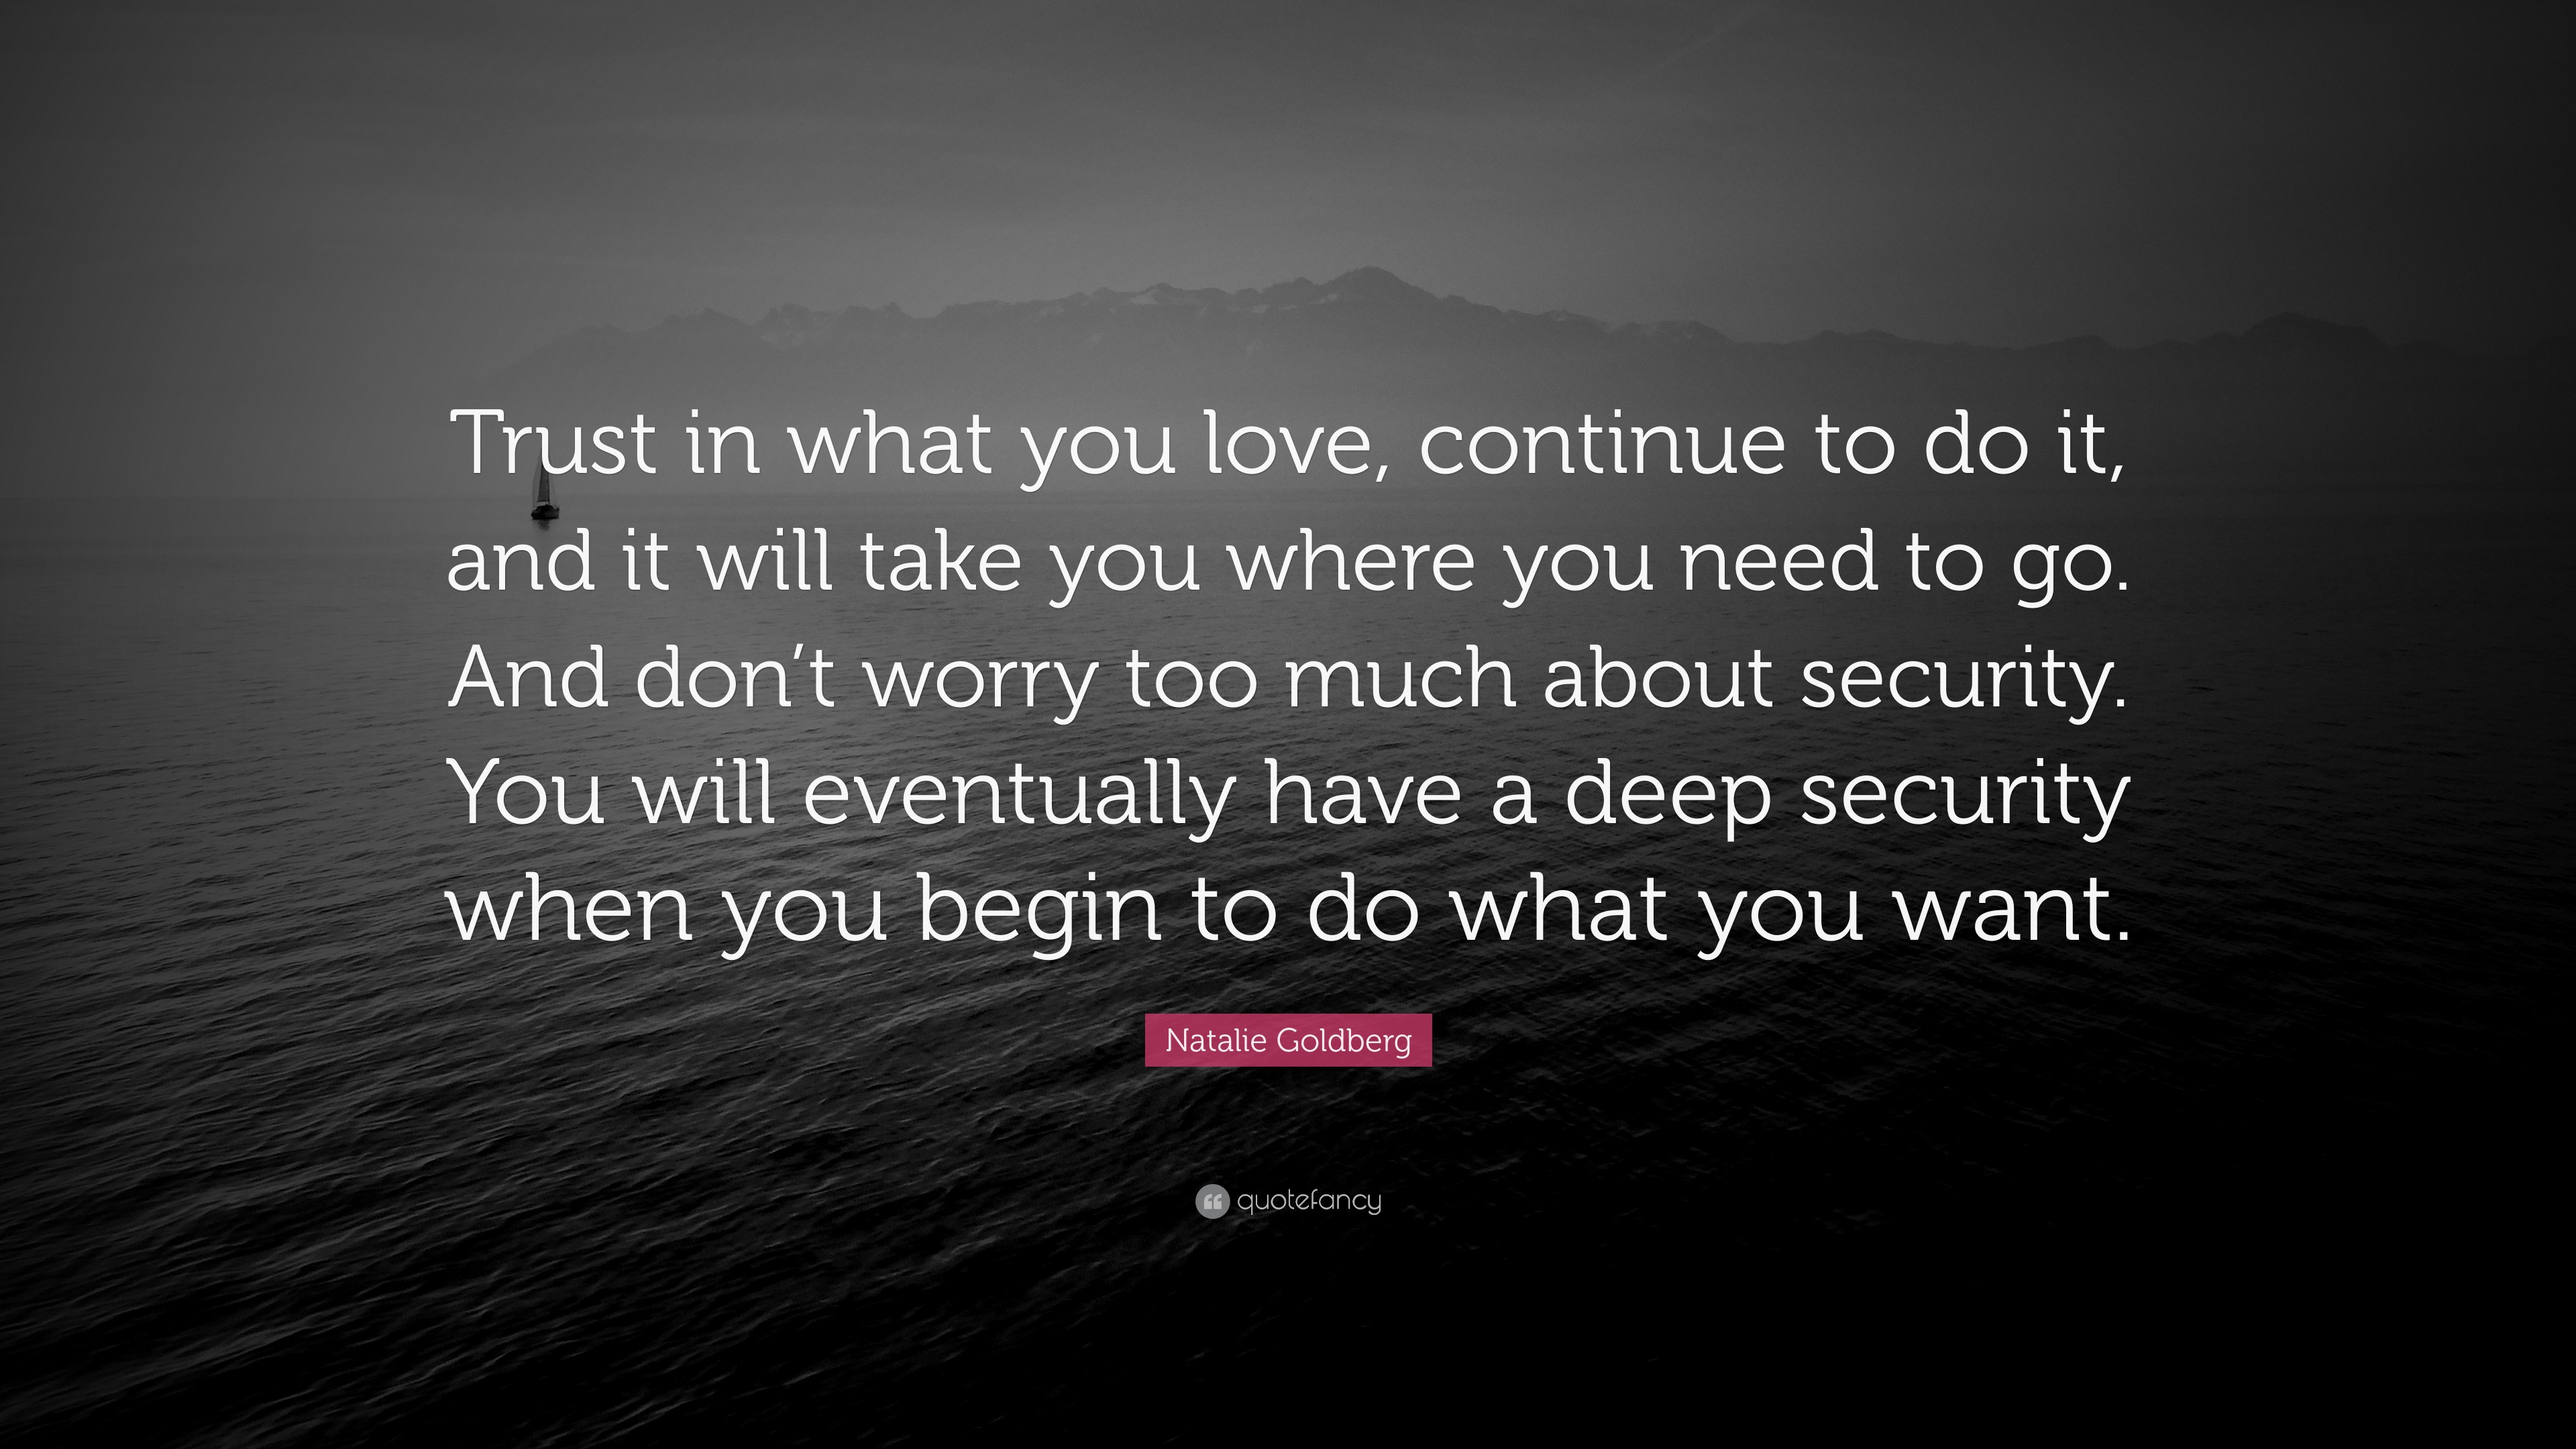 Natalie Goldberg Quote “Trust in what you love continue to do it